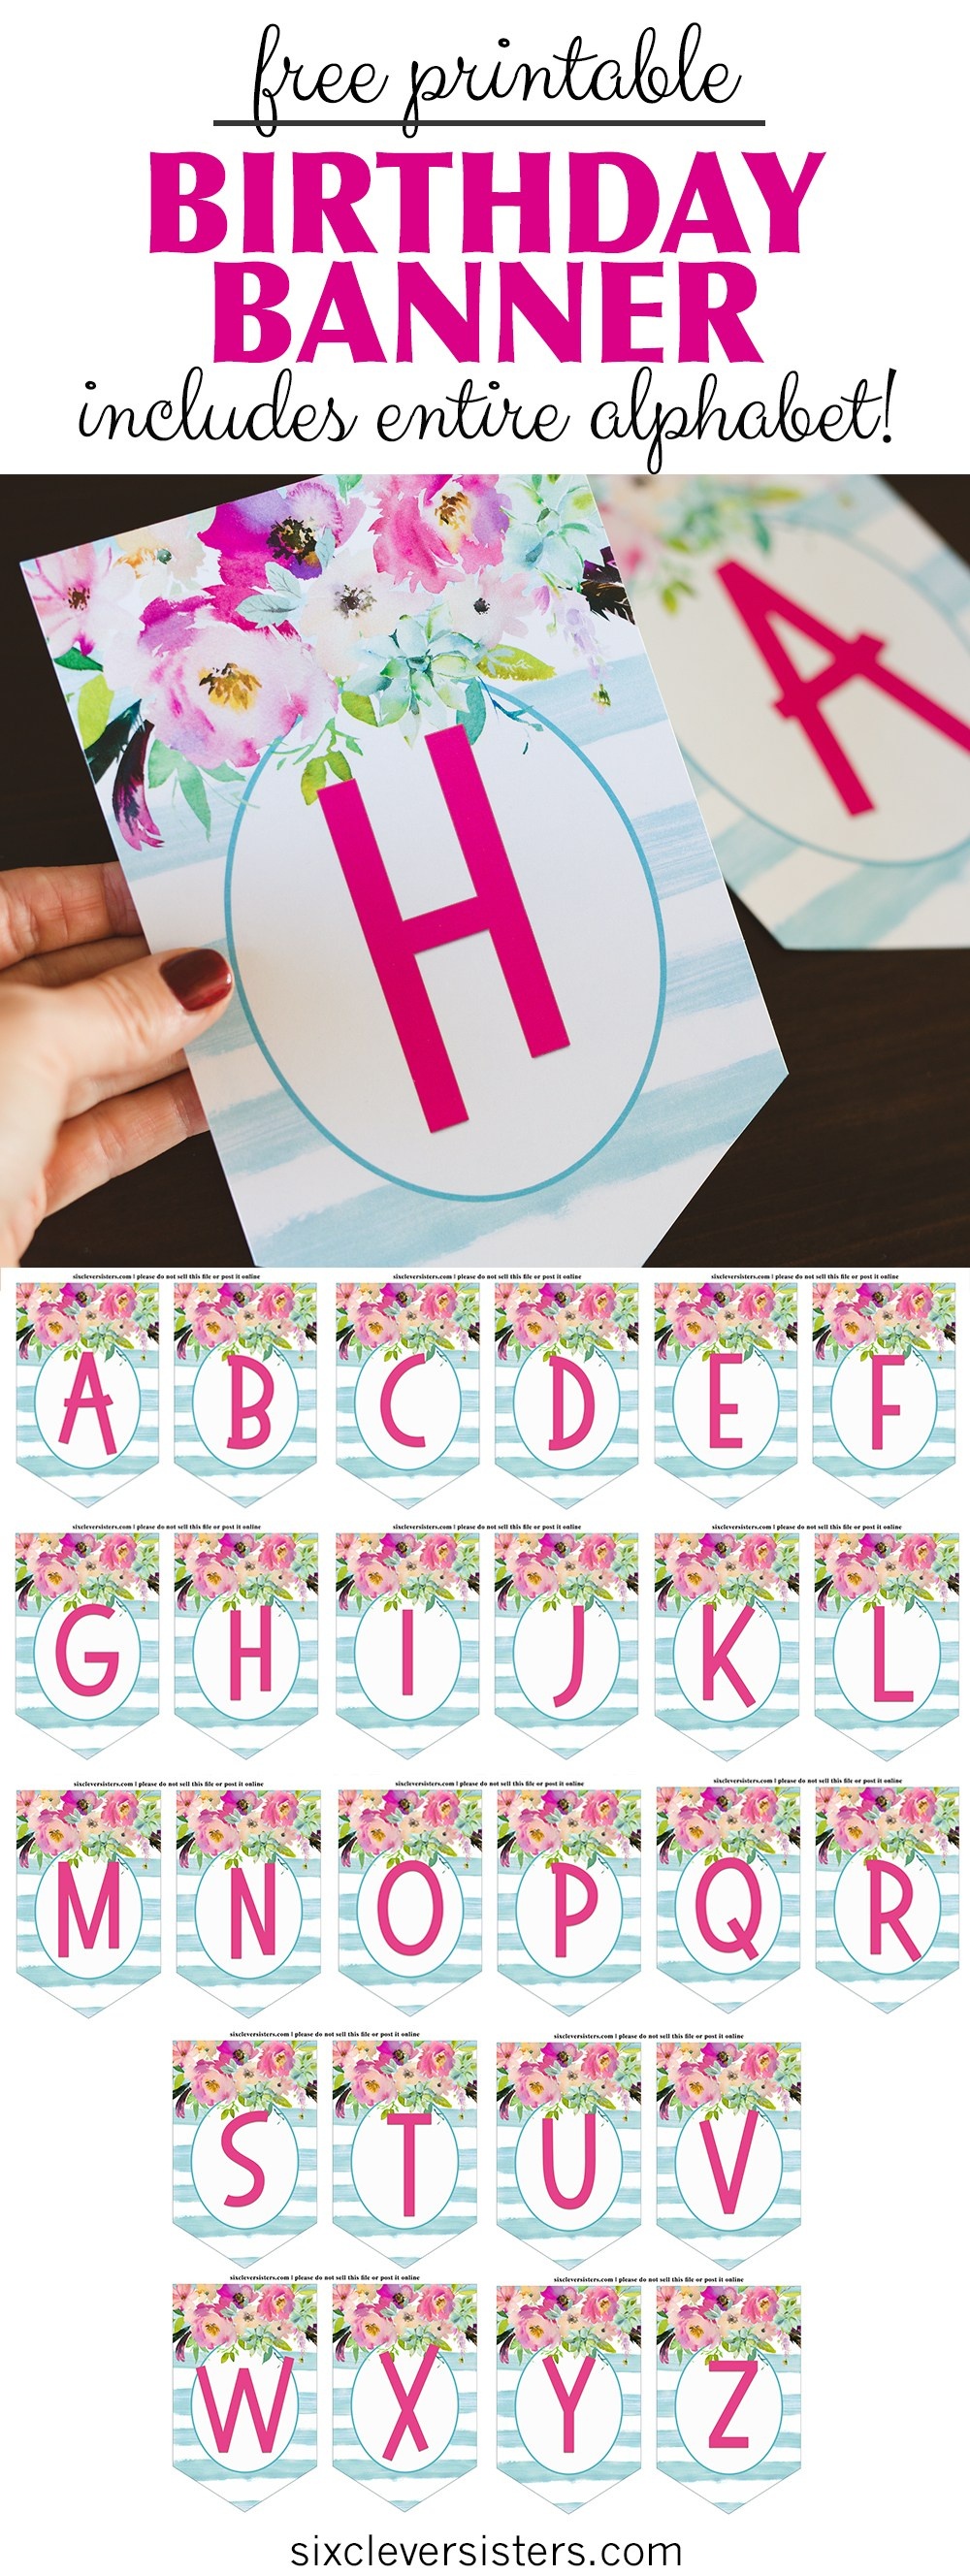 Free Printable Birthday Banner - Six Clever Sisters - Diy Birthday Banner Free Printable